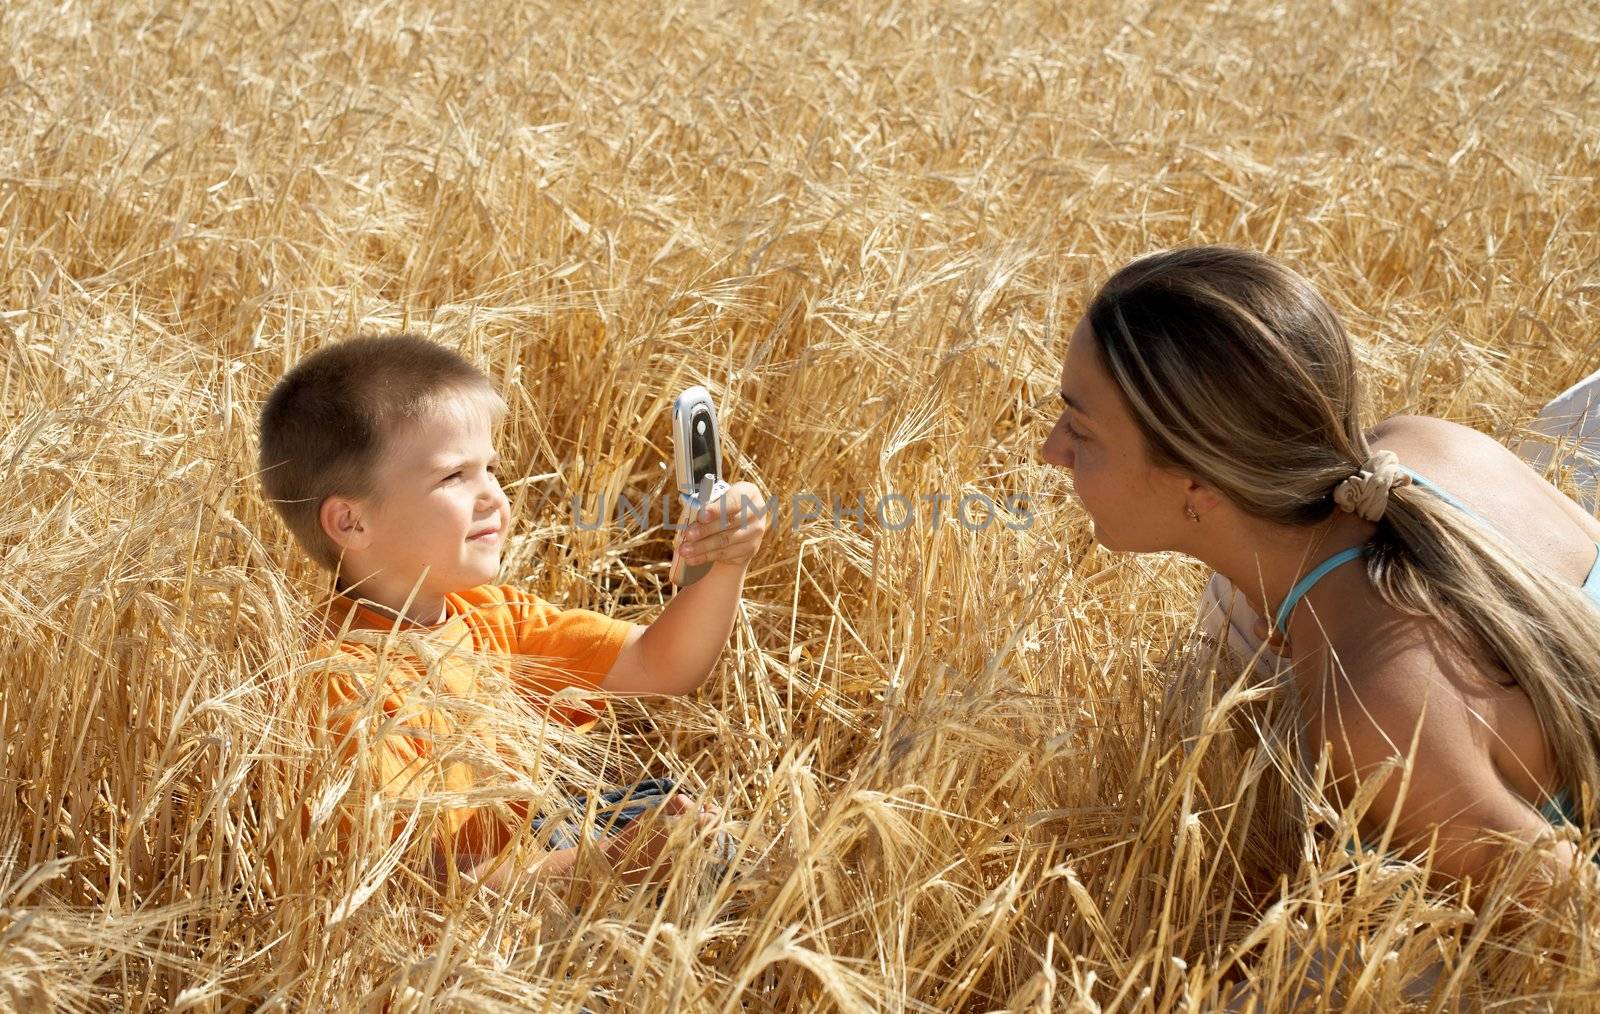 lovely kid picturing mom with cell phone